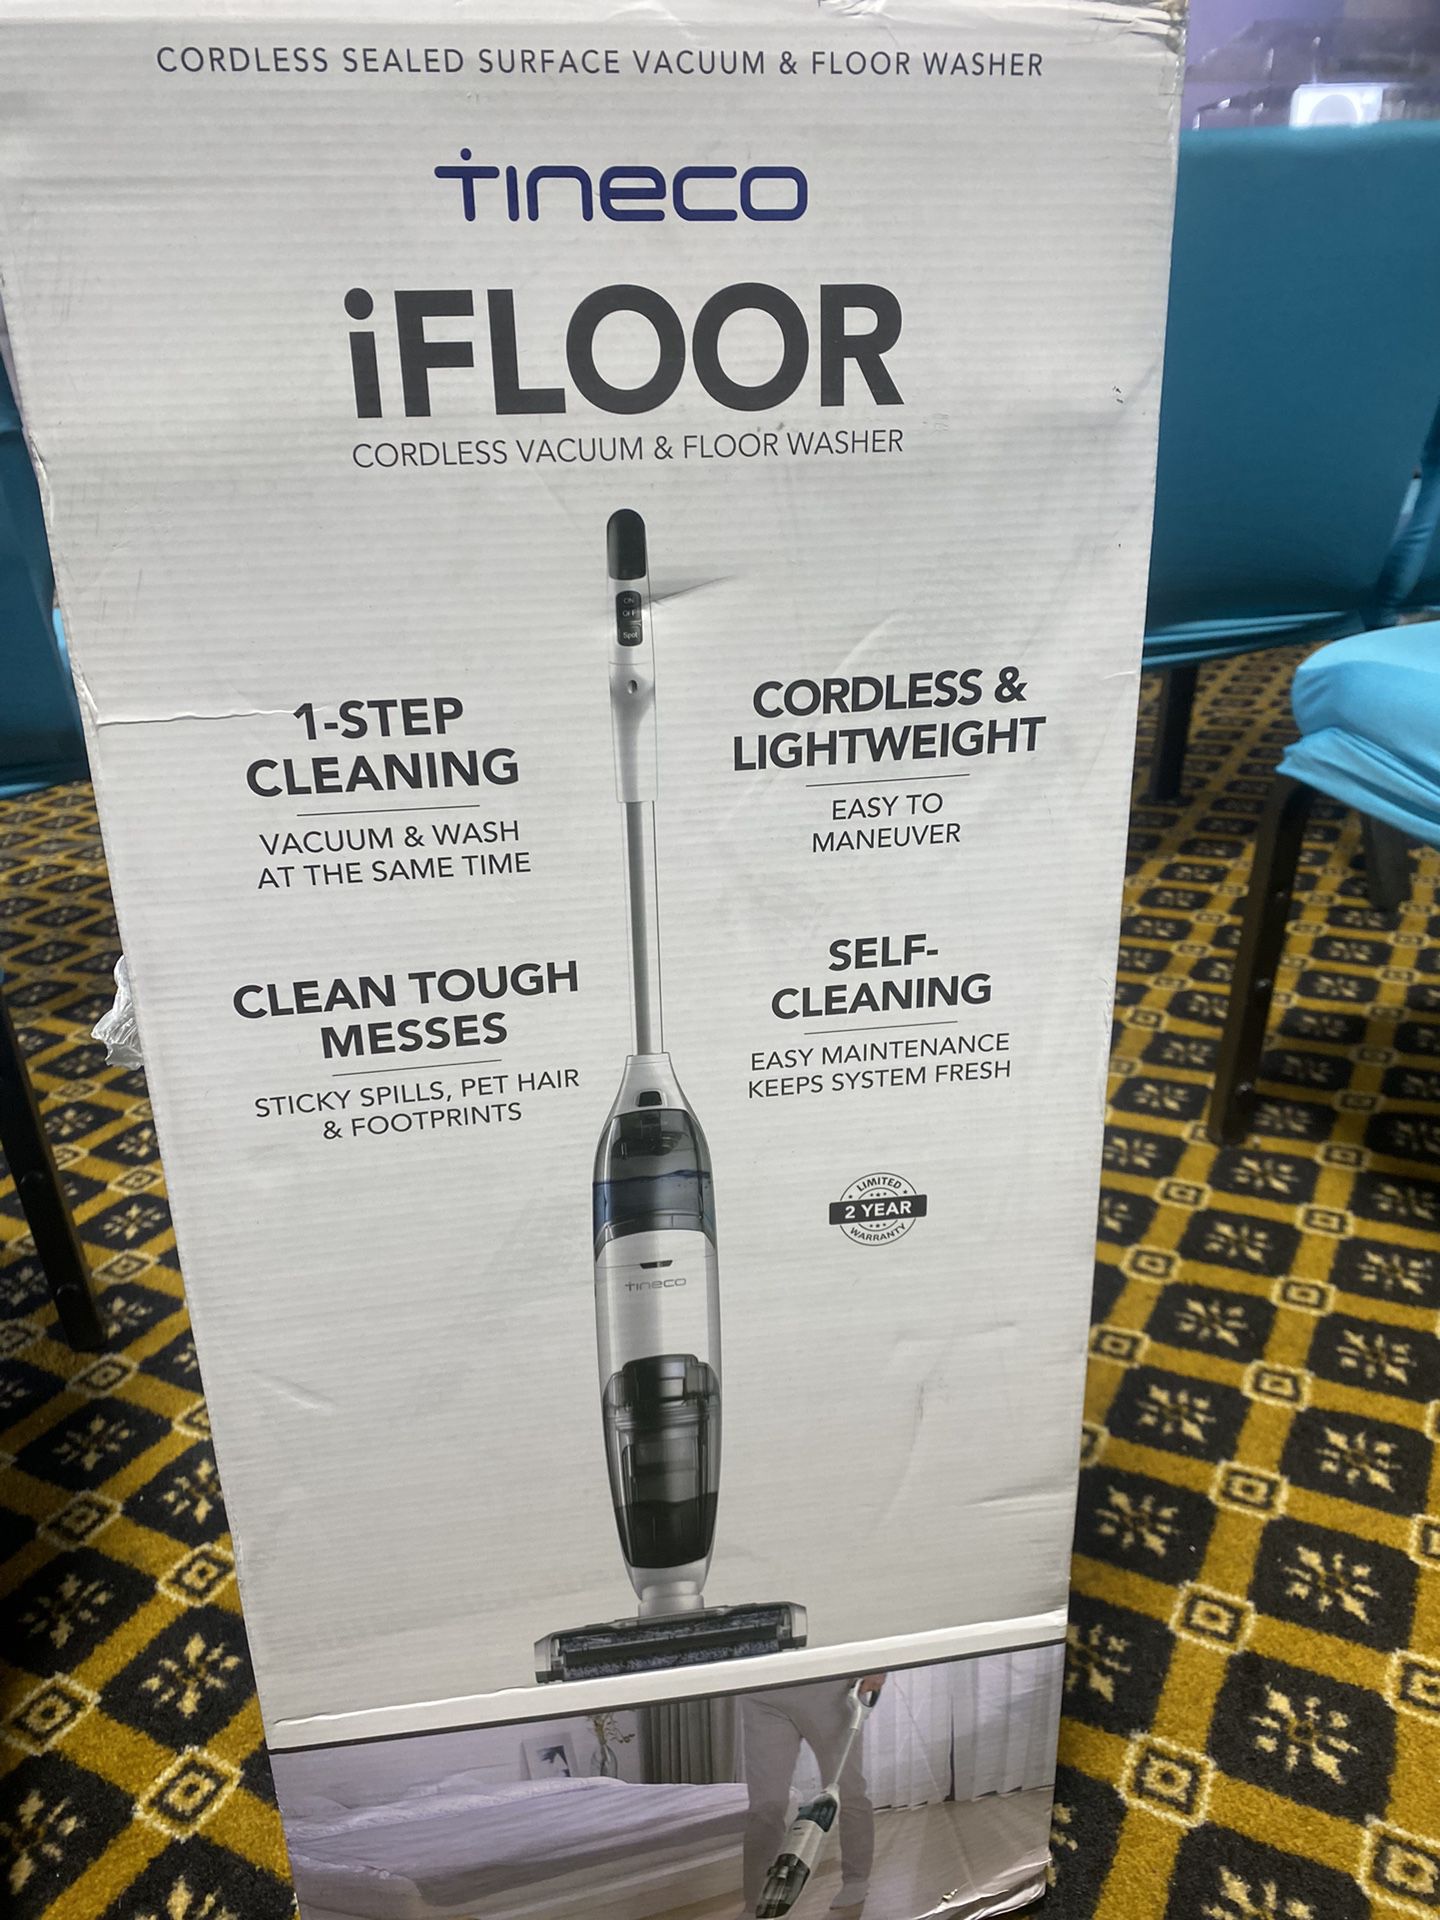  Tineco iFLOOR Cordless Wet Dry Vacuum Cleaner and Mop,  Powerful One-Step Cleaning for Hard Floors, Great for Sticky Messes and Pet  Hair